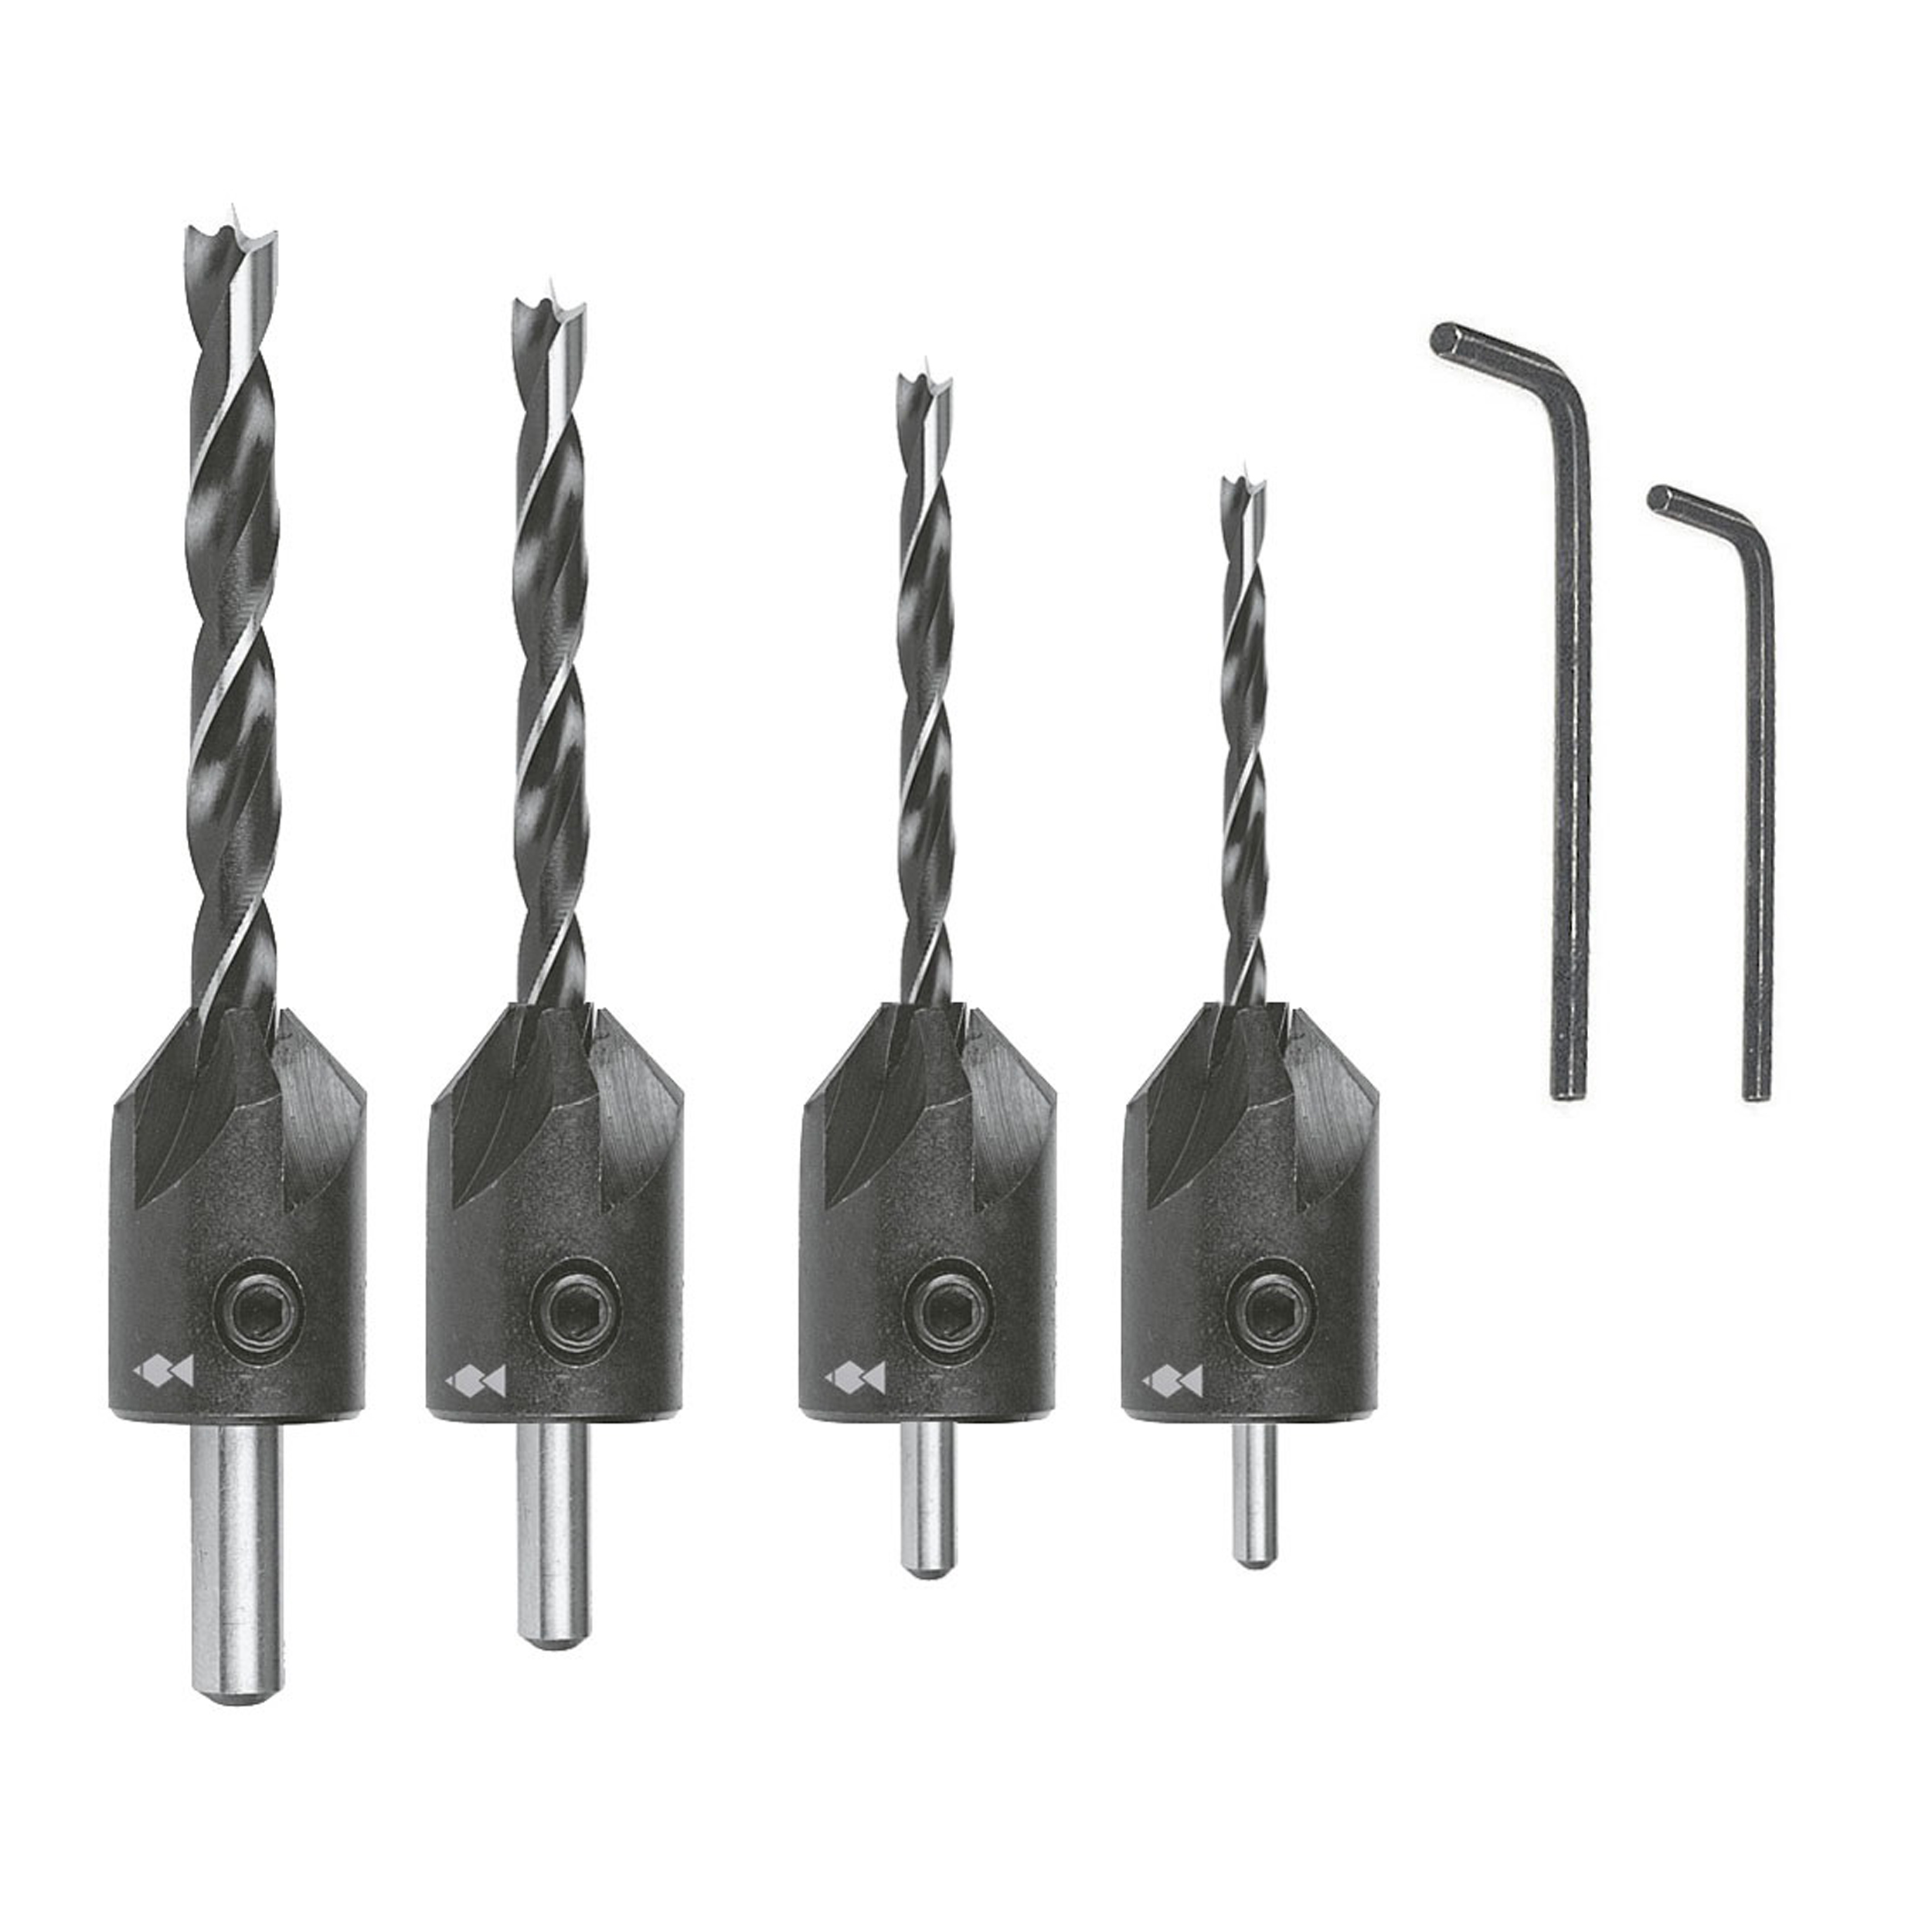 4-piece Drill Bit And Countersink Set - 3mm, 4mm, 5mm, And 6mm D